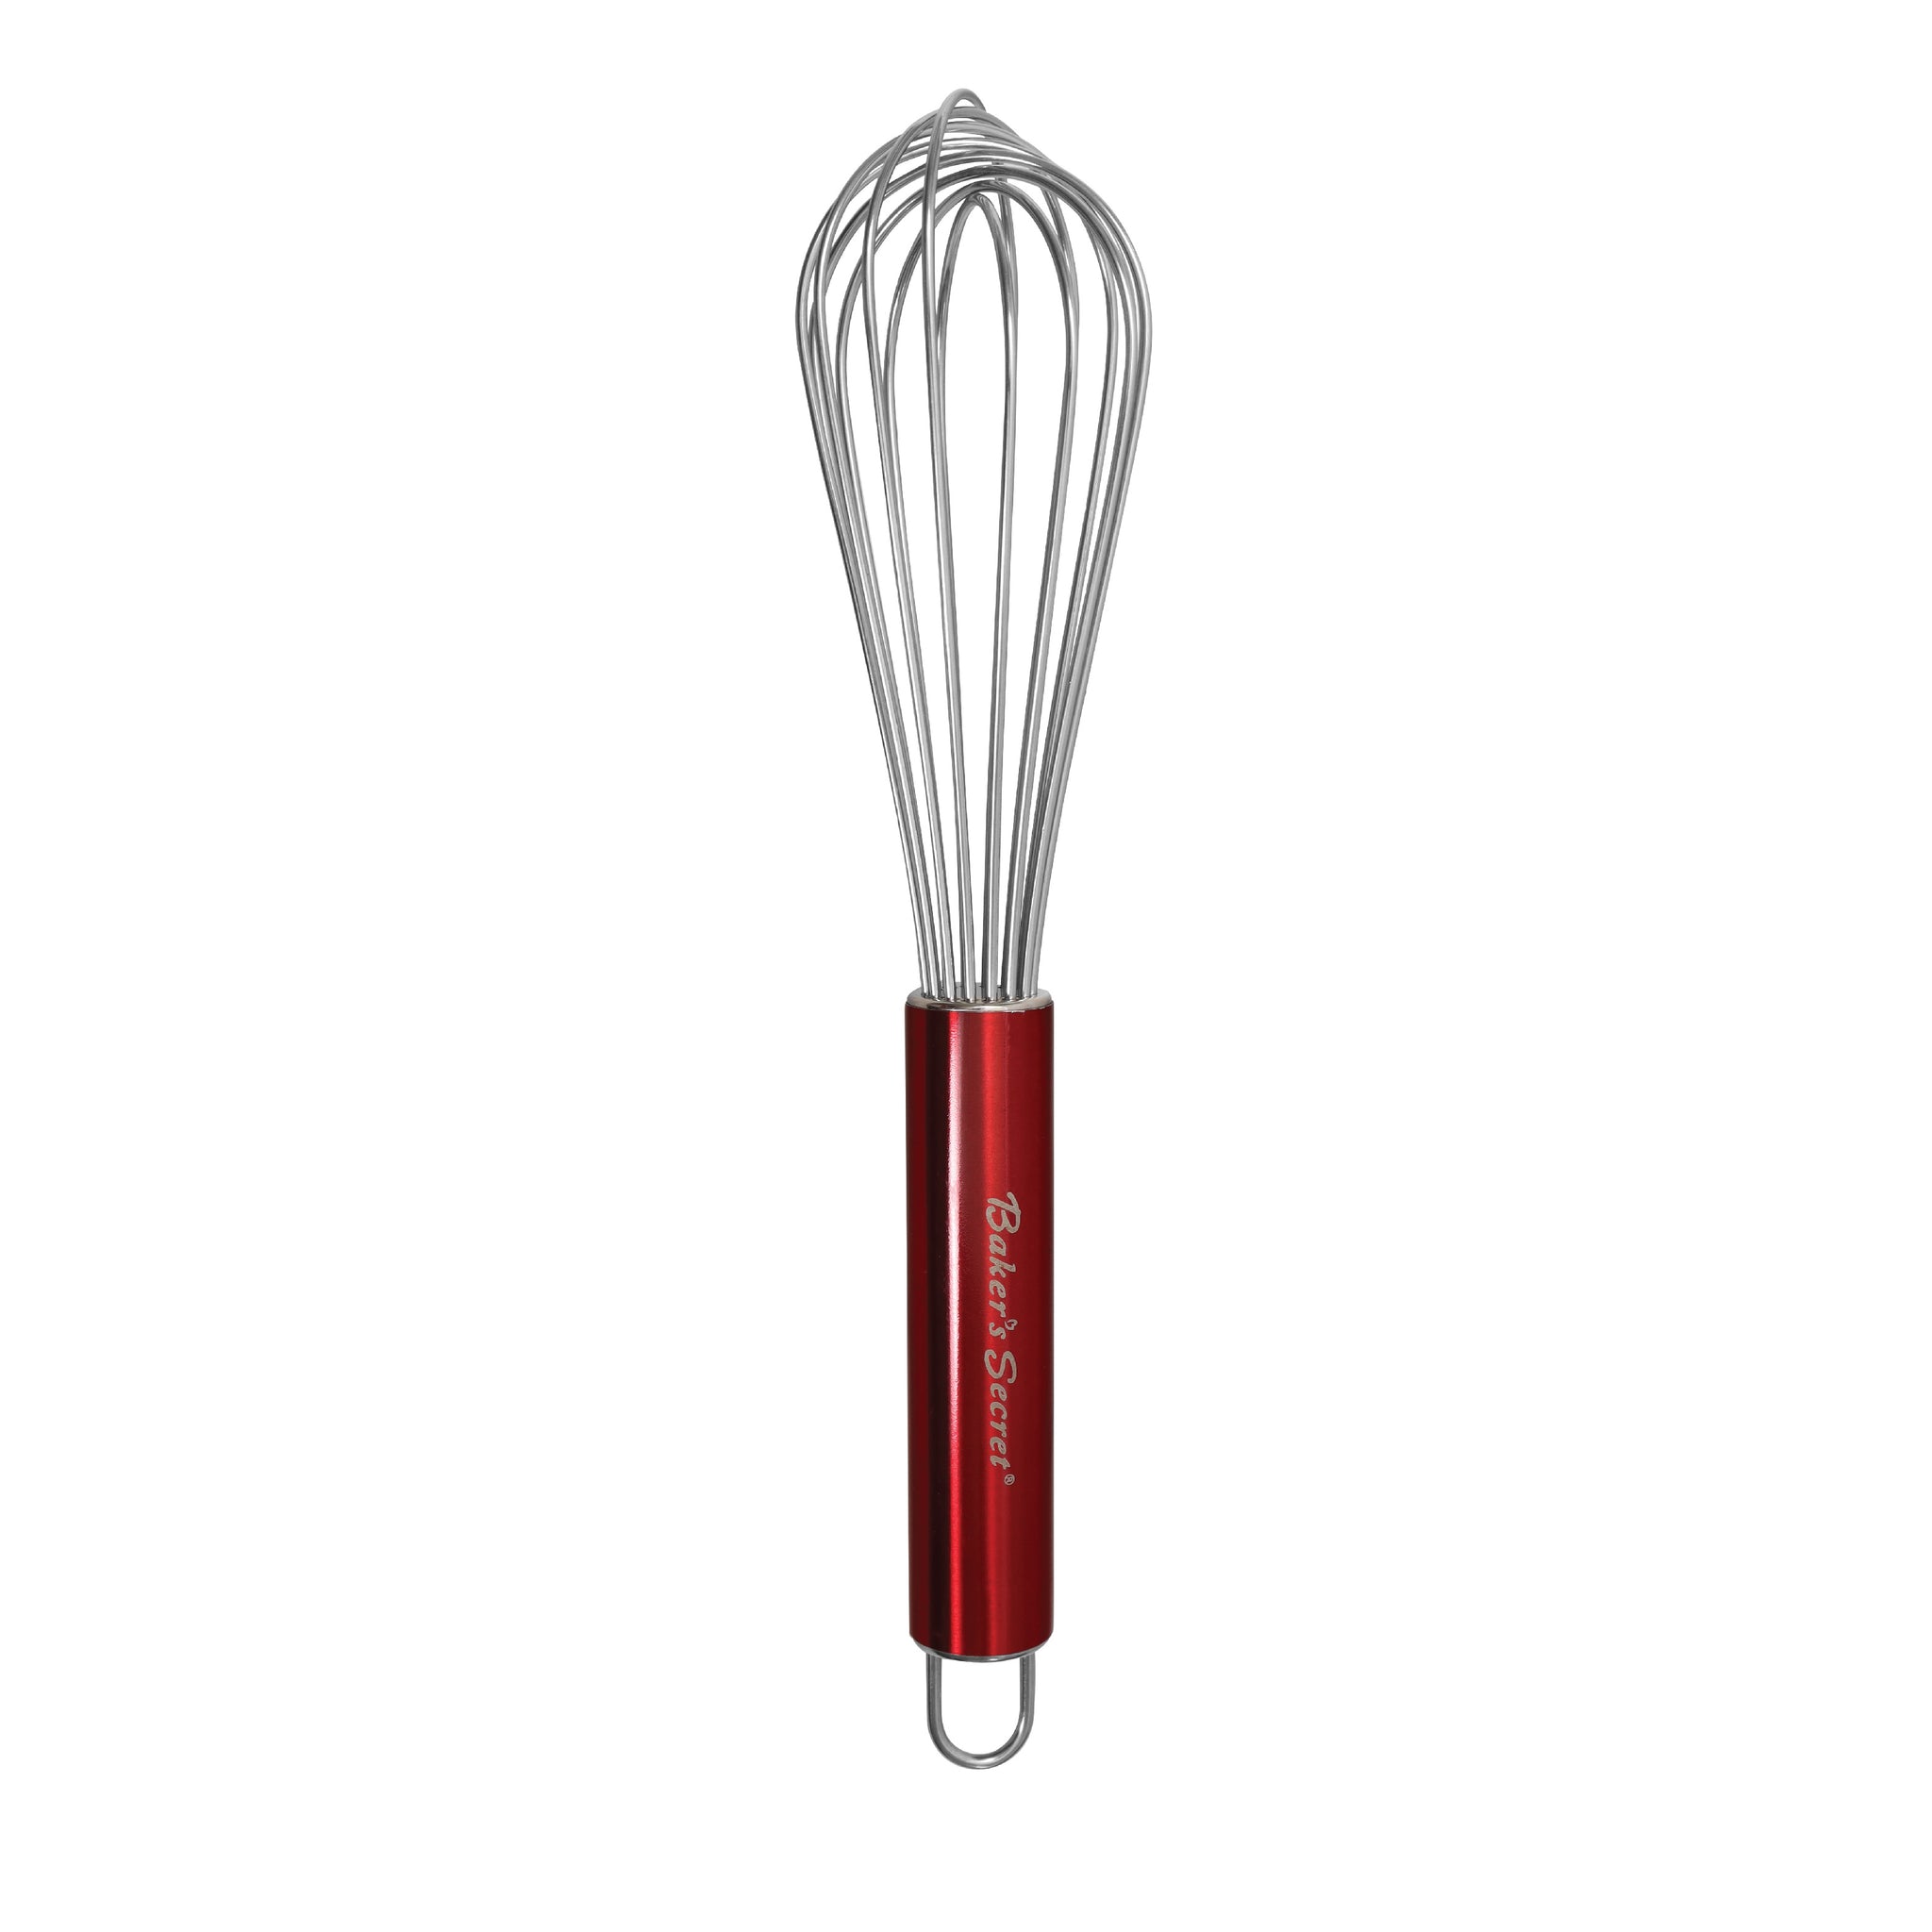 Stainless Steel Whisks  Cookware Accessories - Baker's Secret